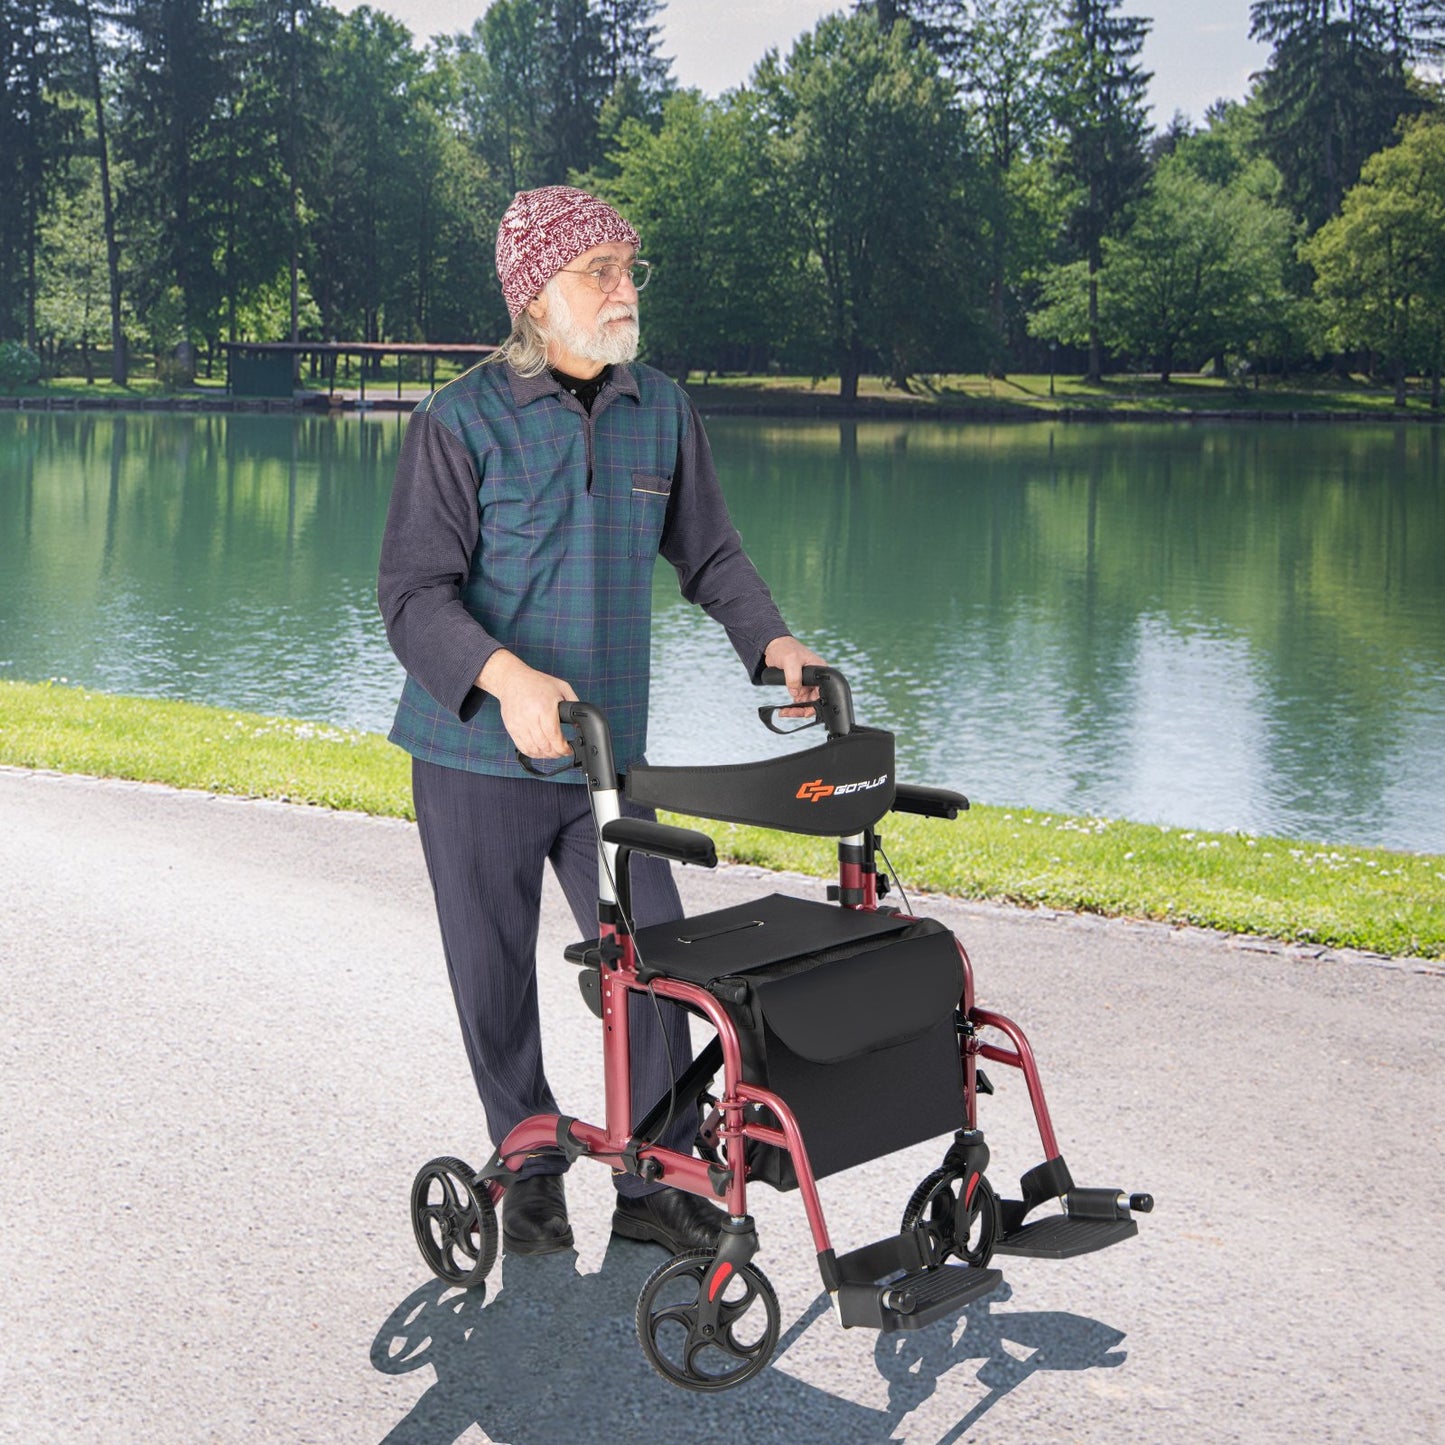 Folding Rollator Walker with Seat and Wheels Supports up to 300 lbs, Red